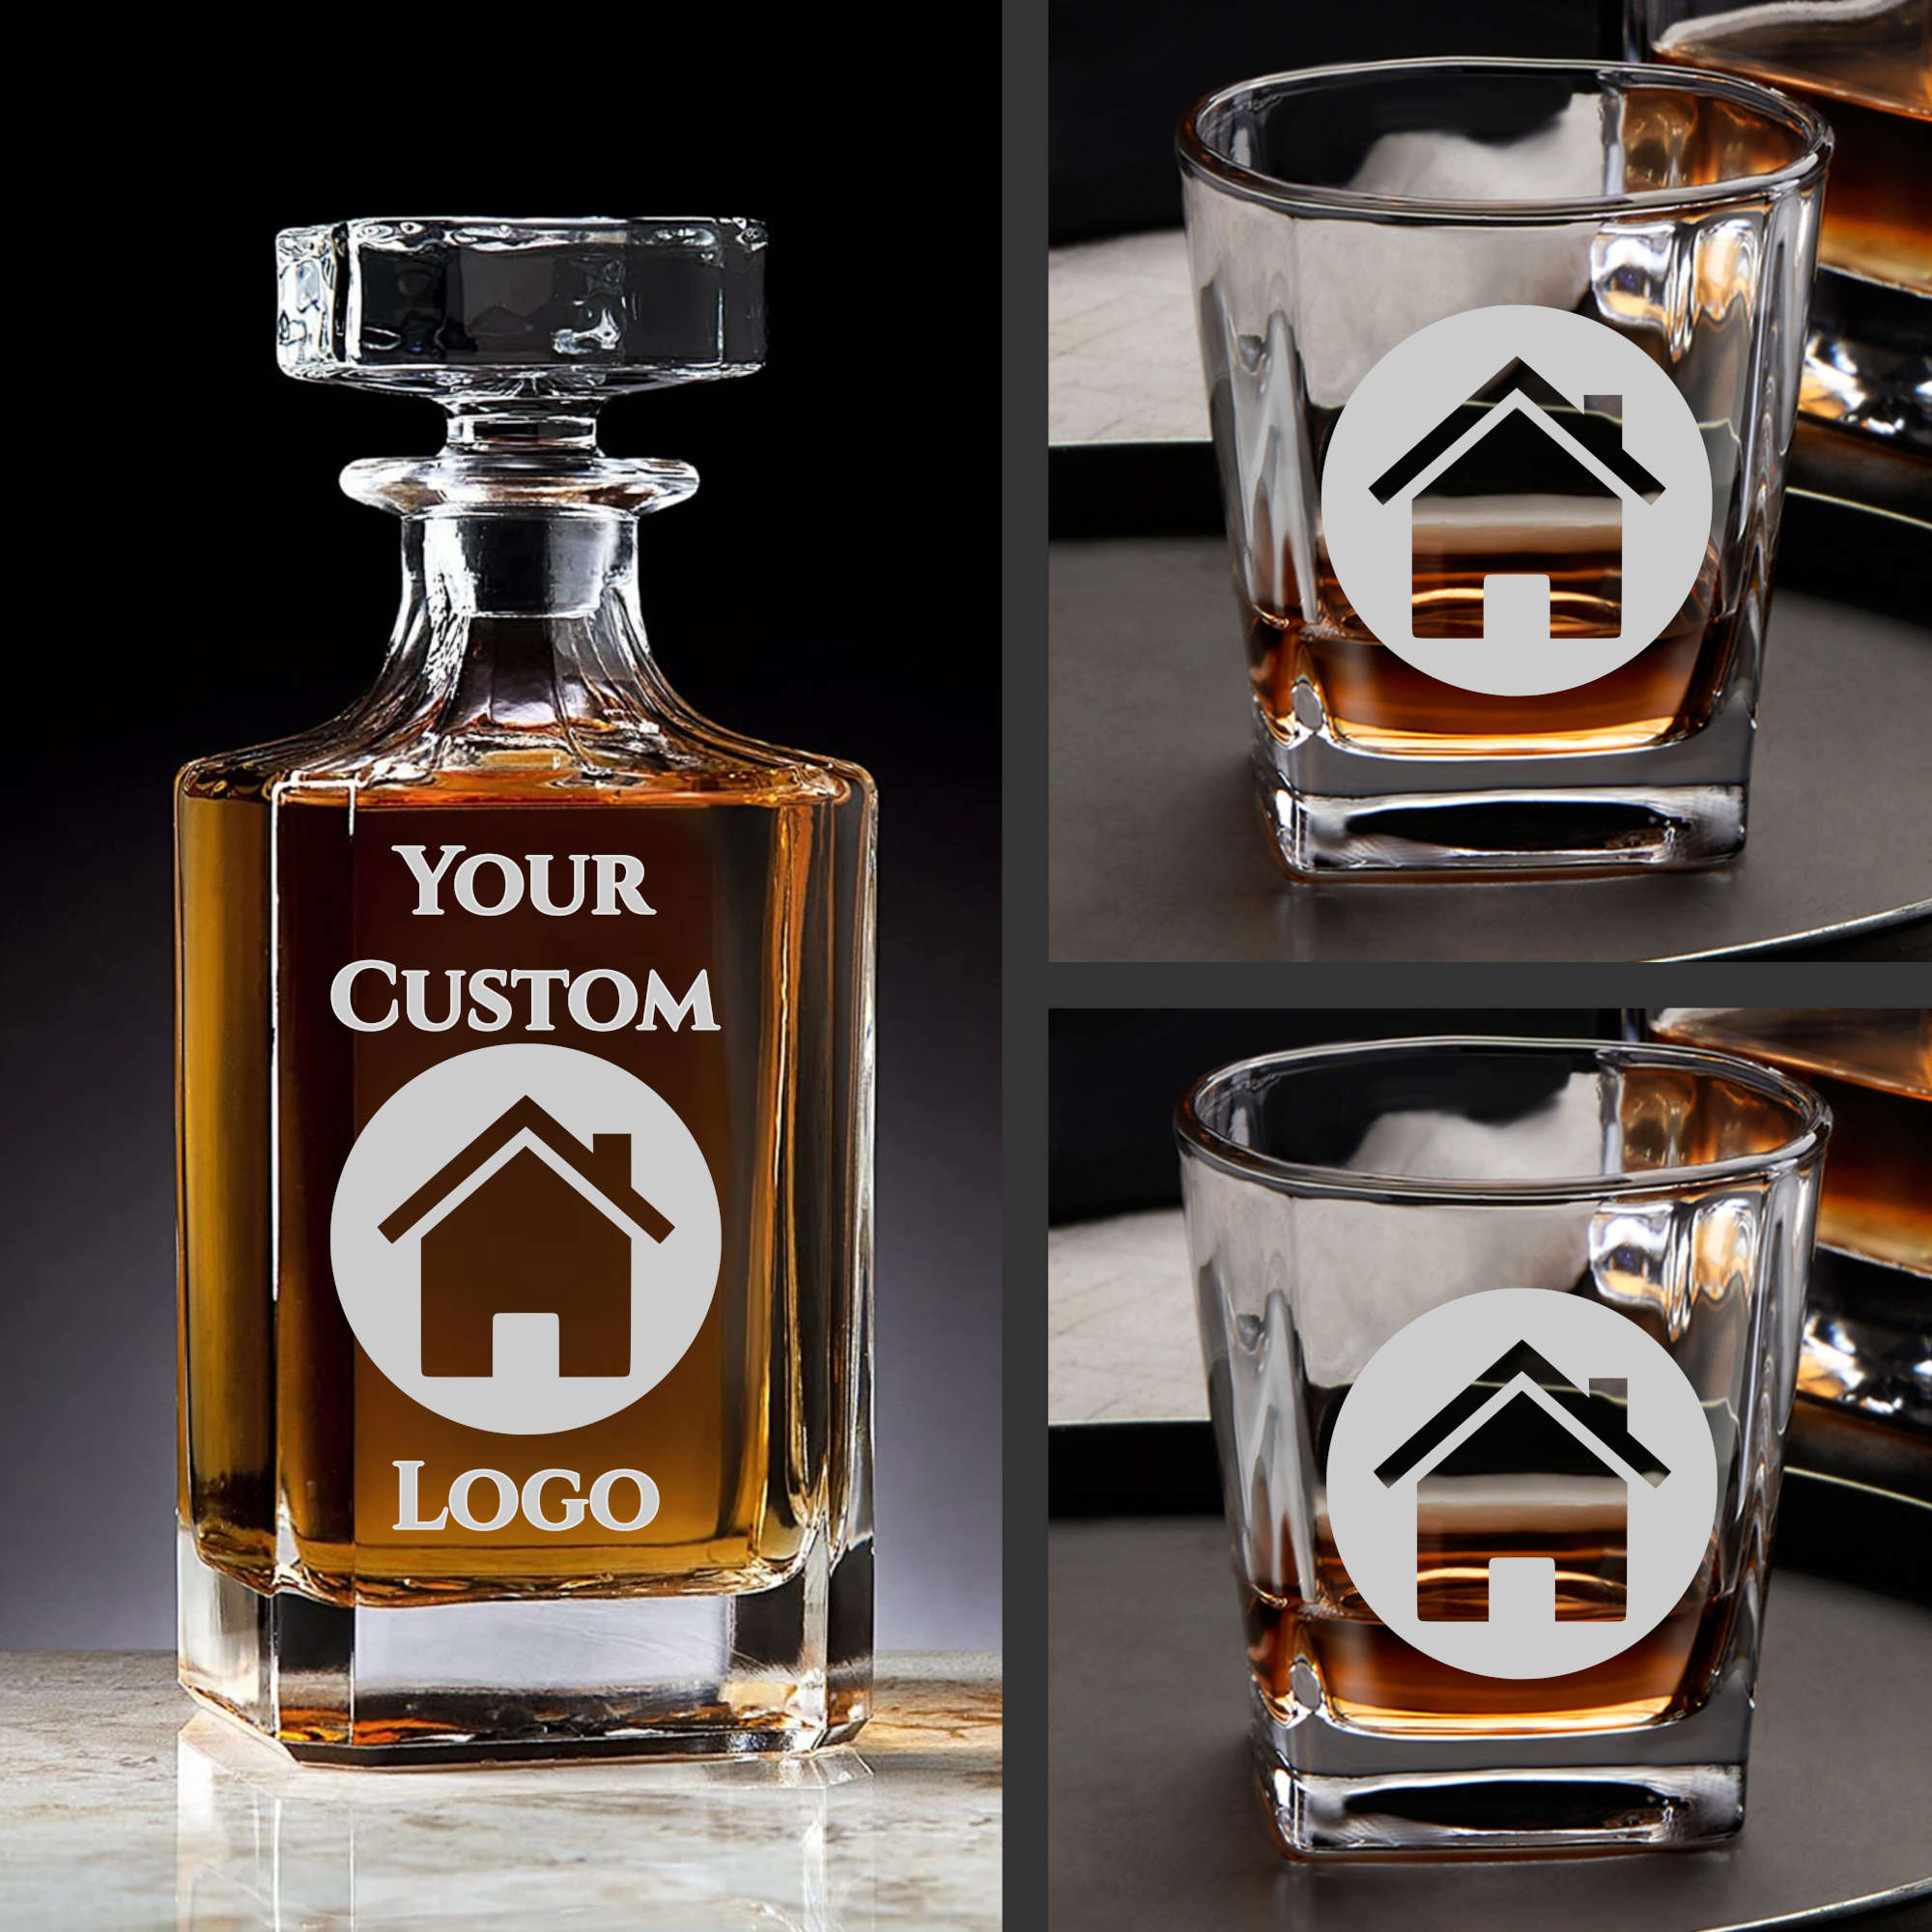 Classic logo Decanter Set, Personalized Barware, Personalized Gift